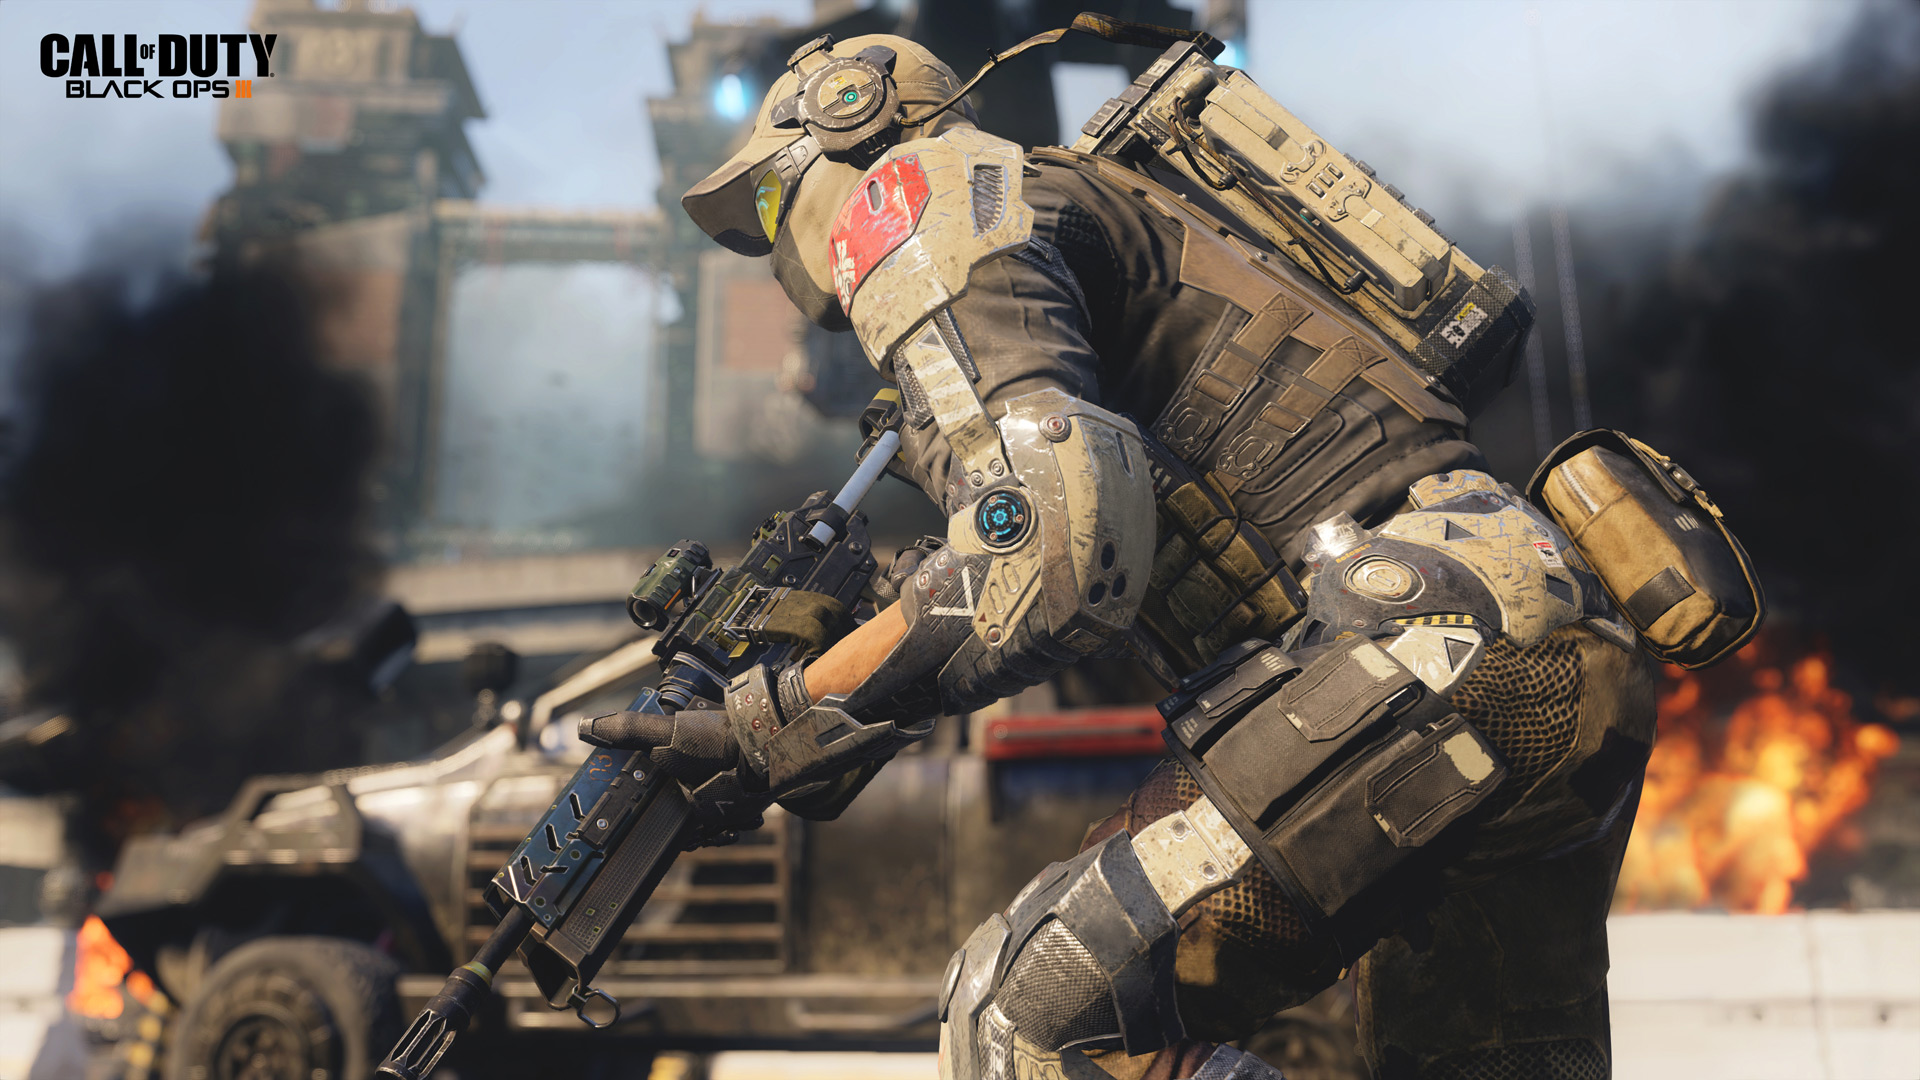 How Black Ops 3 will save Call of Duty